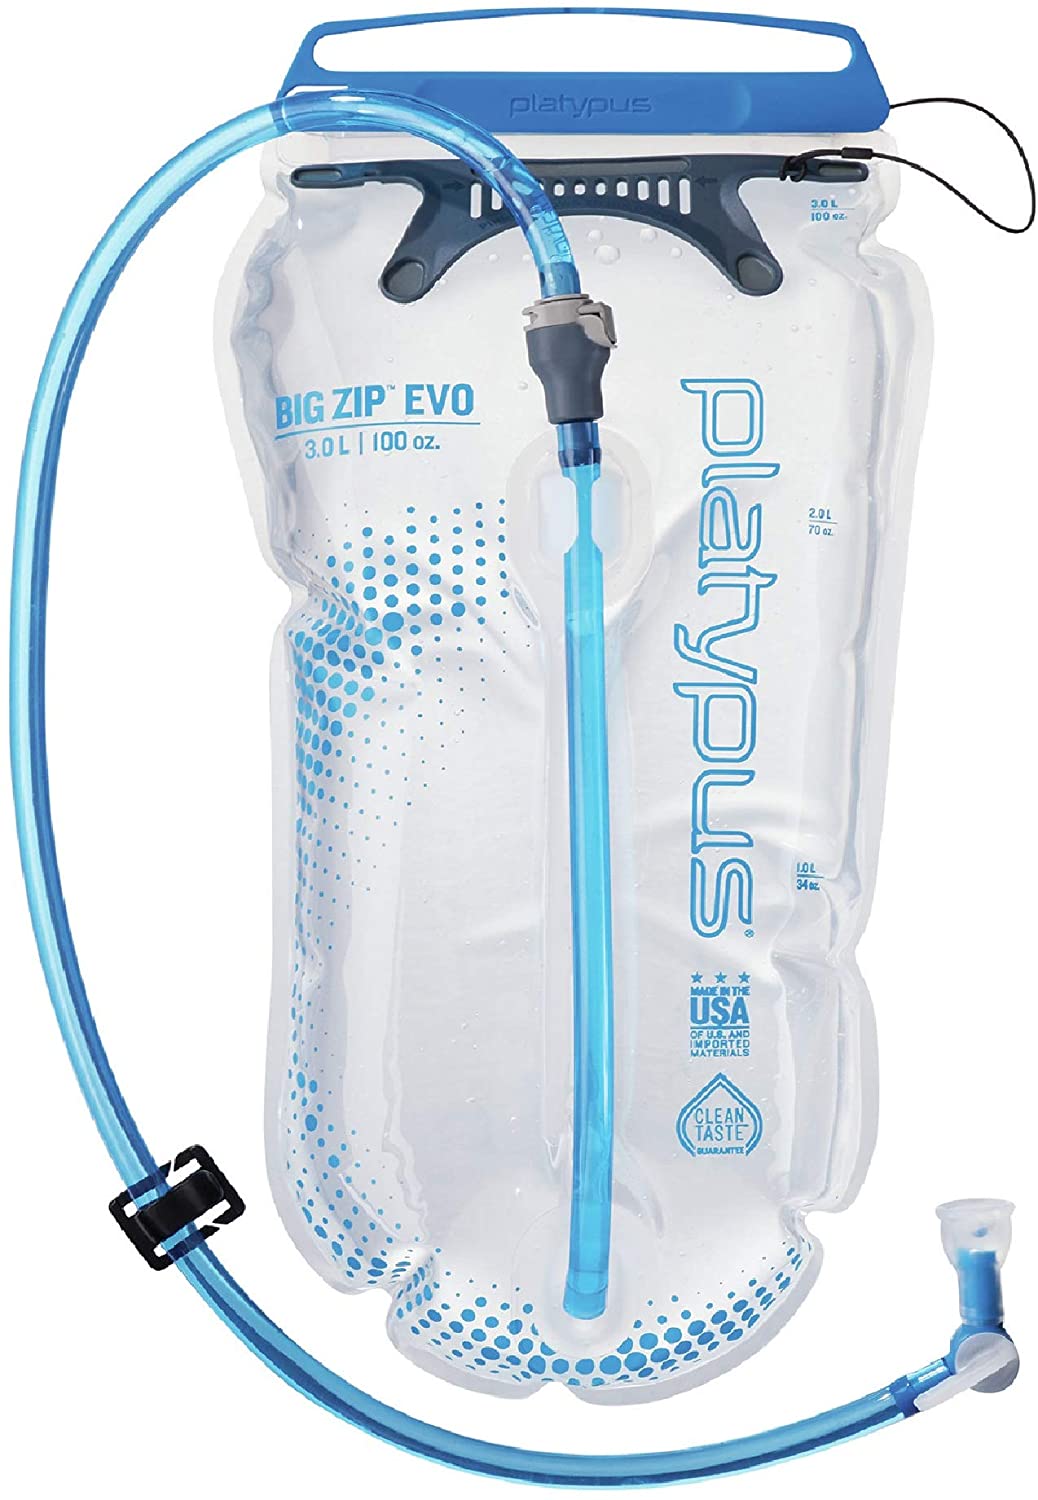 BPA Free Leak Proof Tasteless Hydration Pack System Large Opening Easy to Clean Water Reservoir for Hiking Biking Climbing Cycling GeekSport Hydration Bladder 3L 100oz 